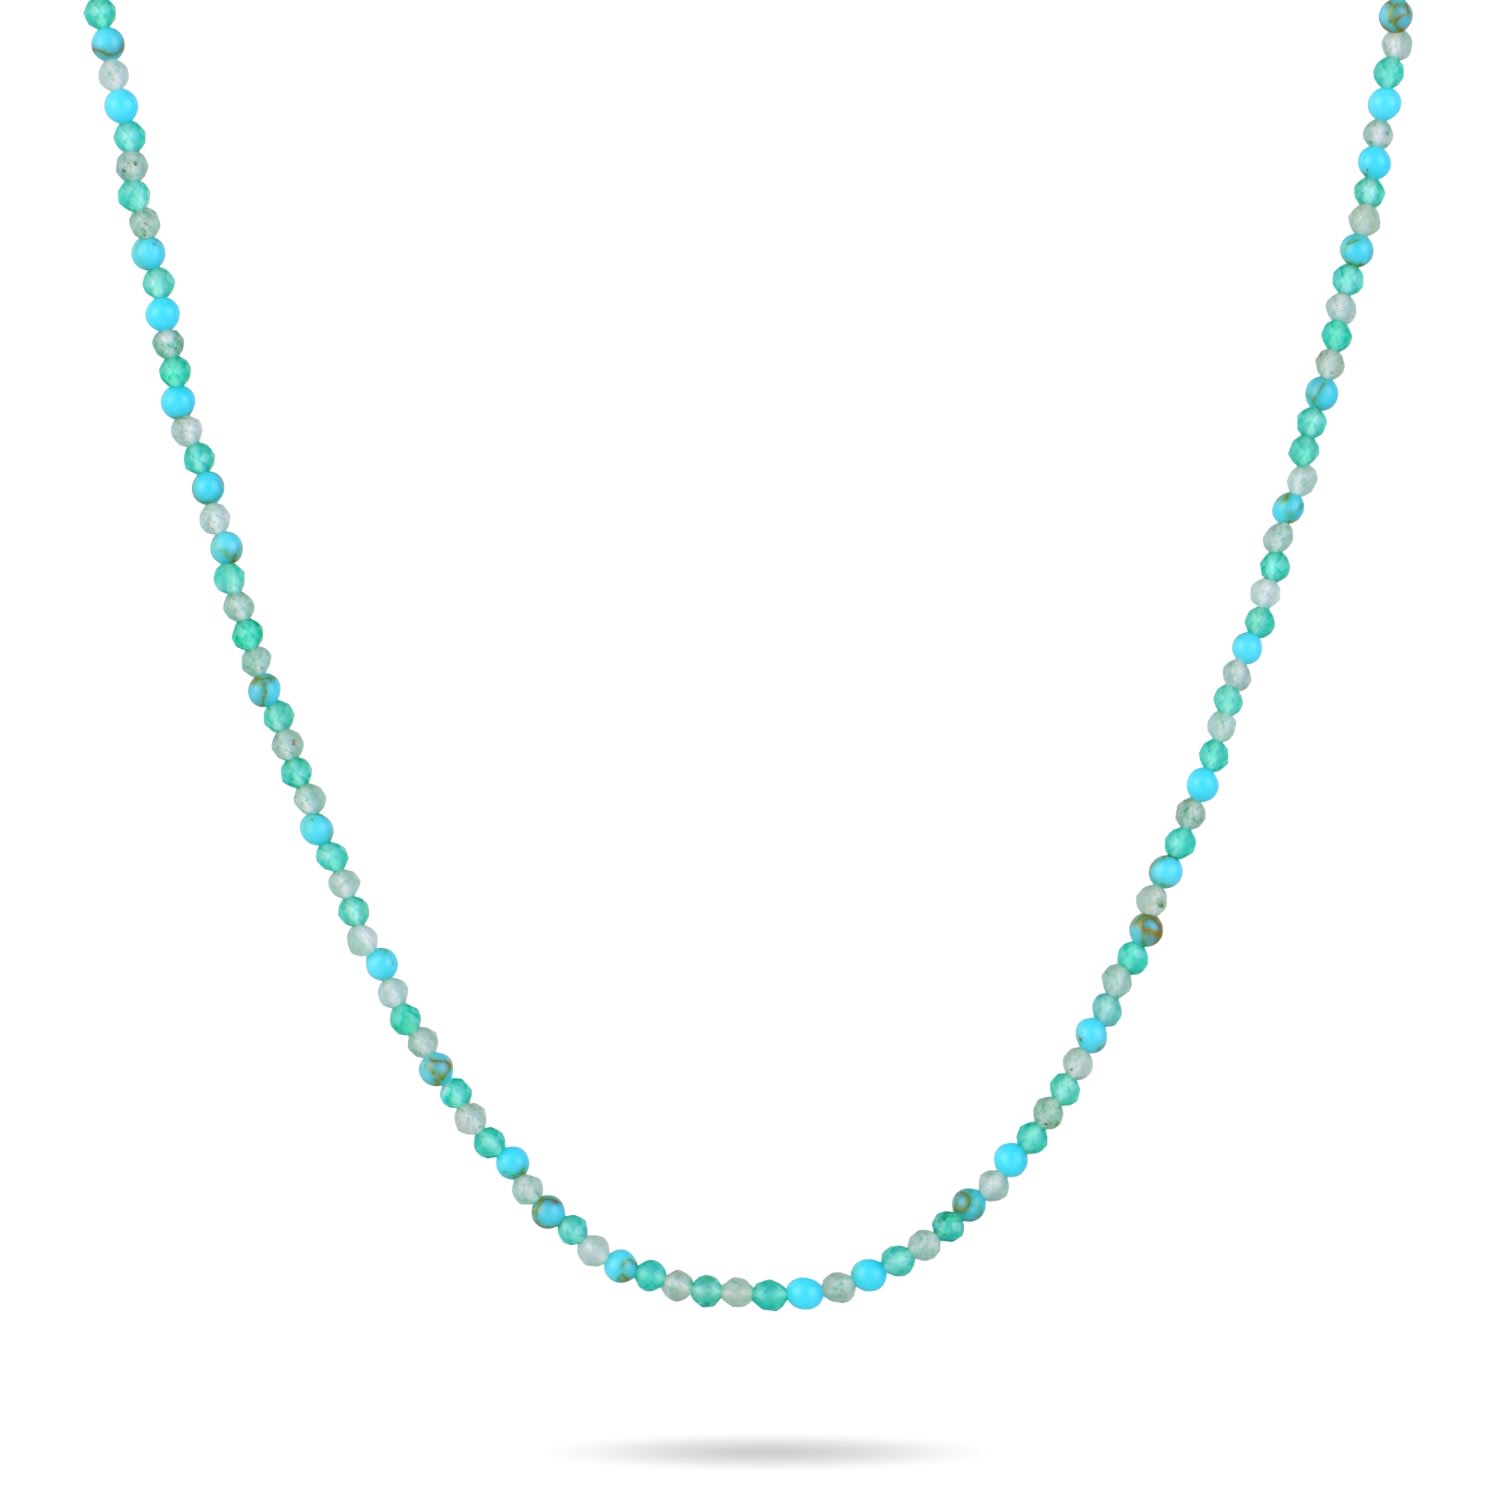 Women’s Multi Turquoise Beaded Necklace Sterling Silver Zohreh V. Jewellery